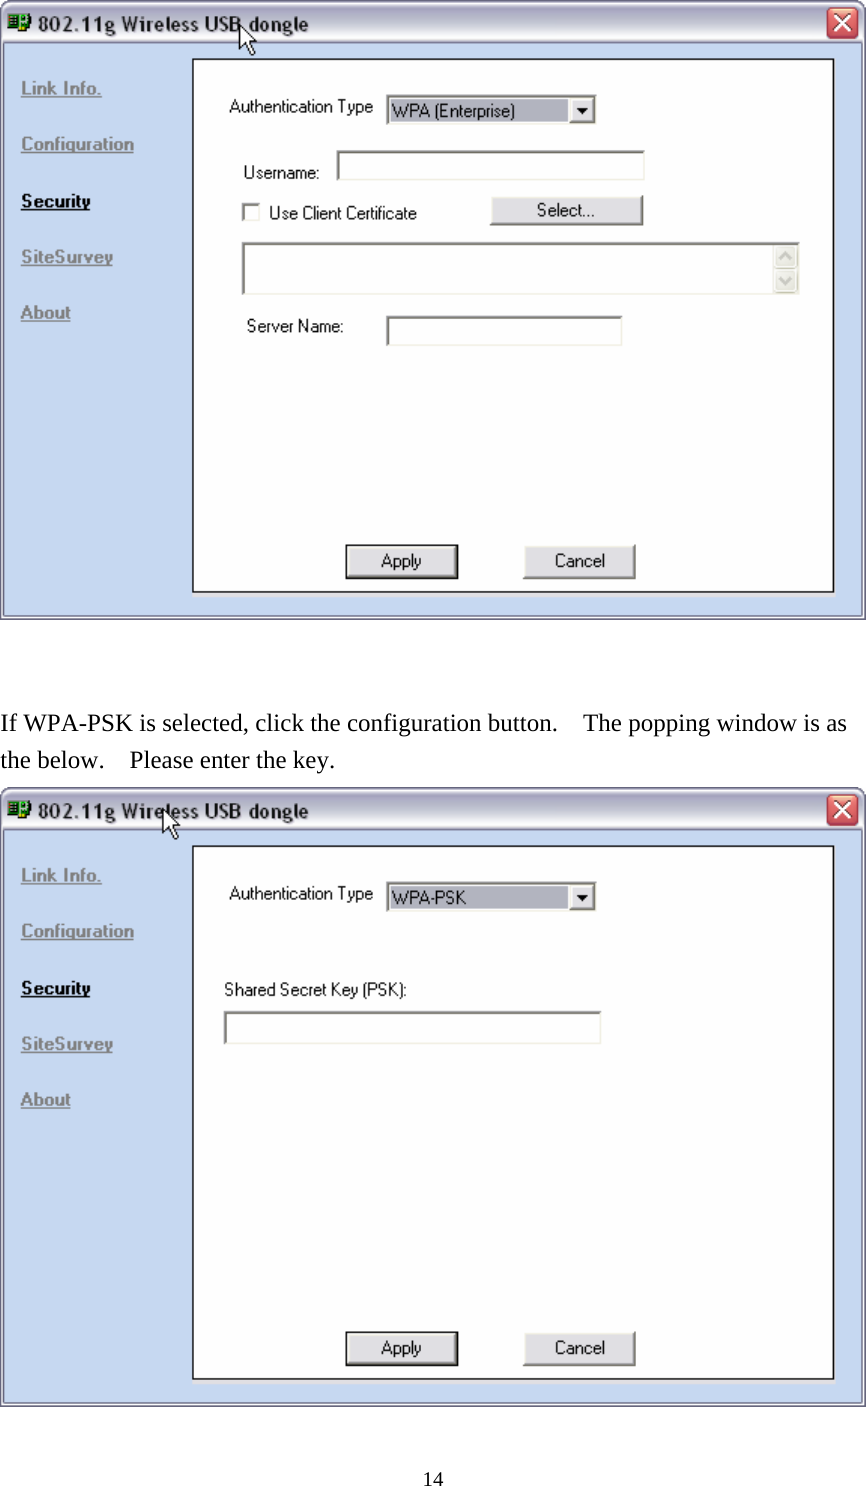  14   If WPA-PSK is selected, click the configuration button.    The popping window is as the below.    Please enter the key.  